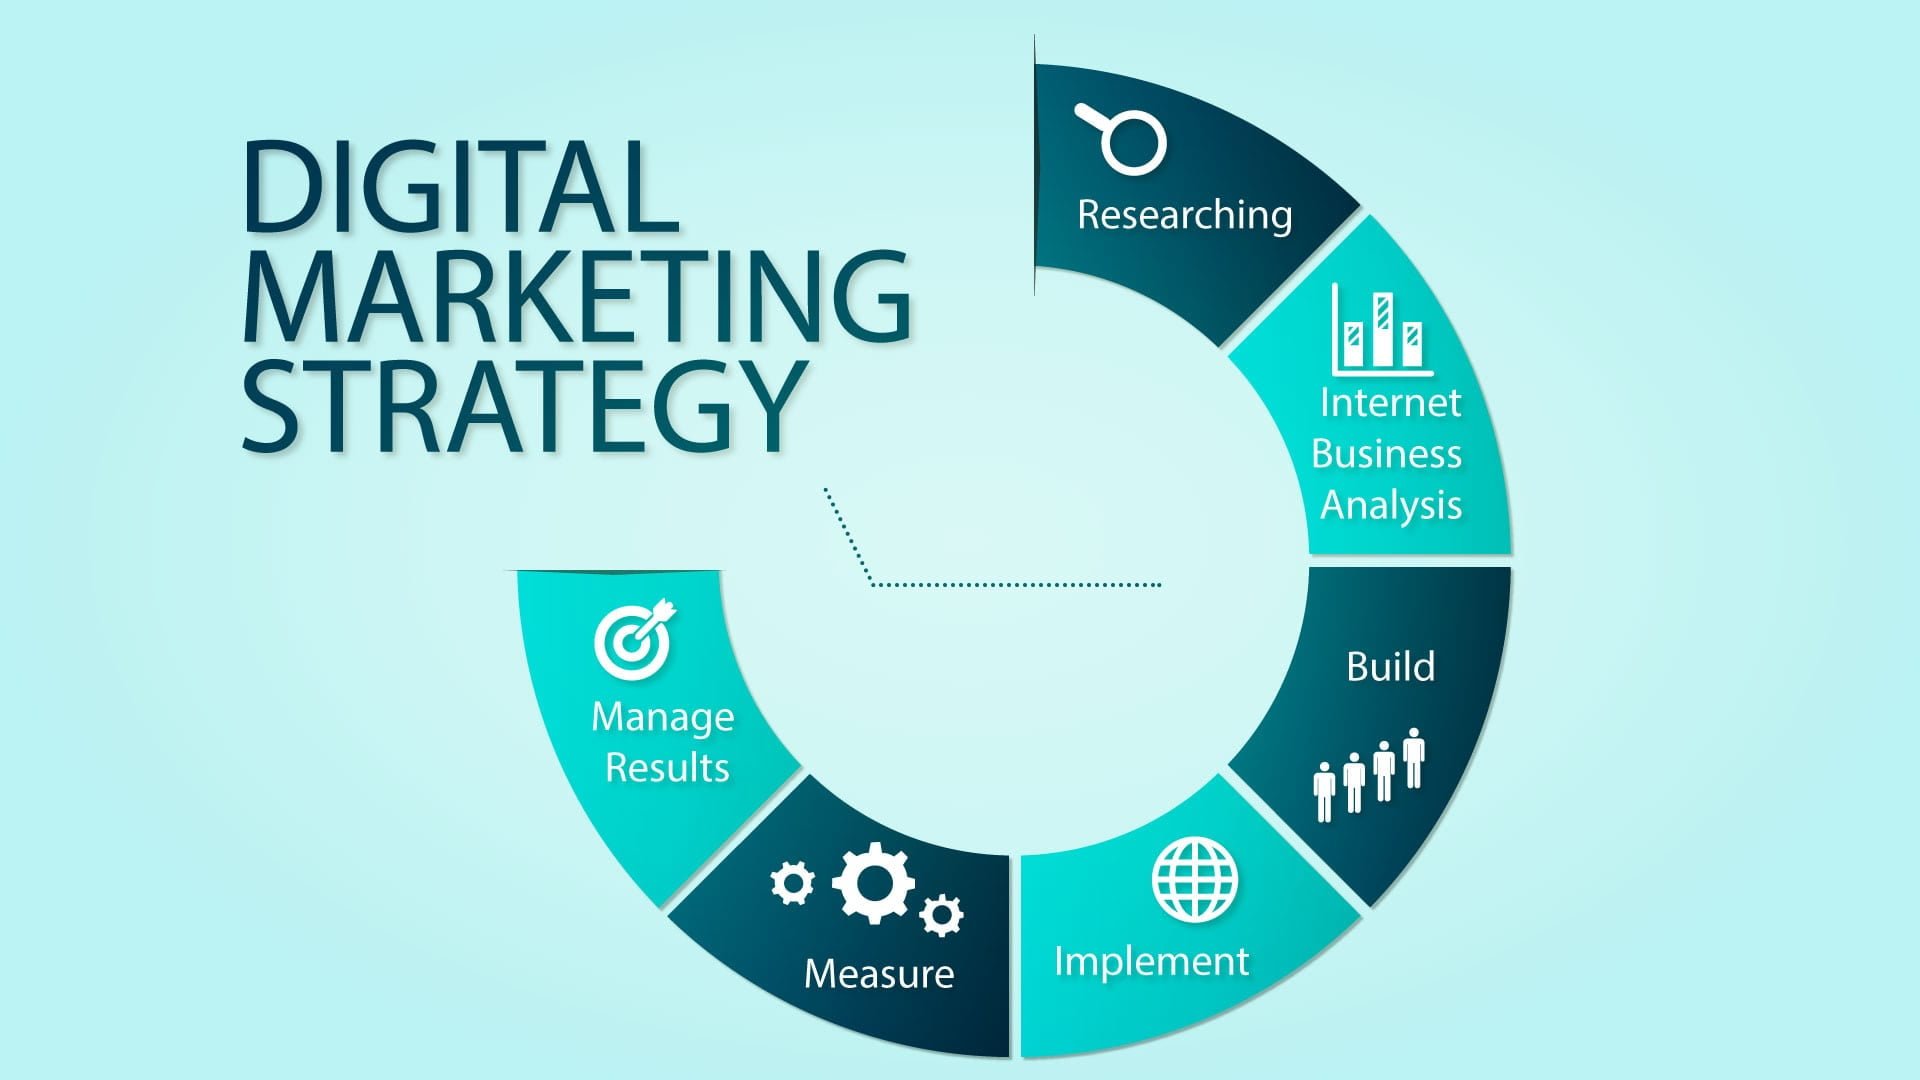 What is the Most Important 5 Step of Digital Marketing Strategy?